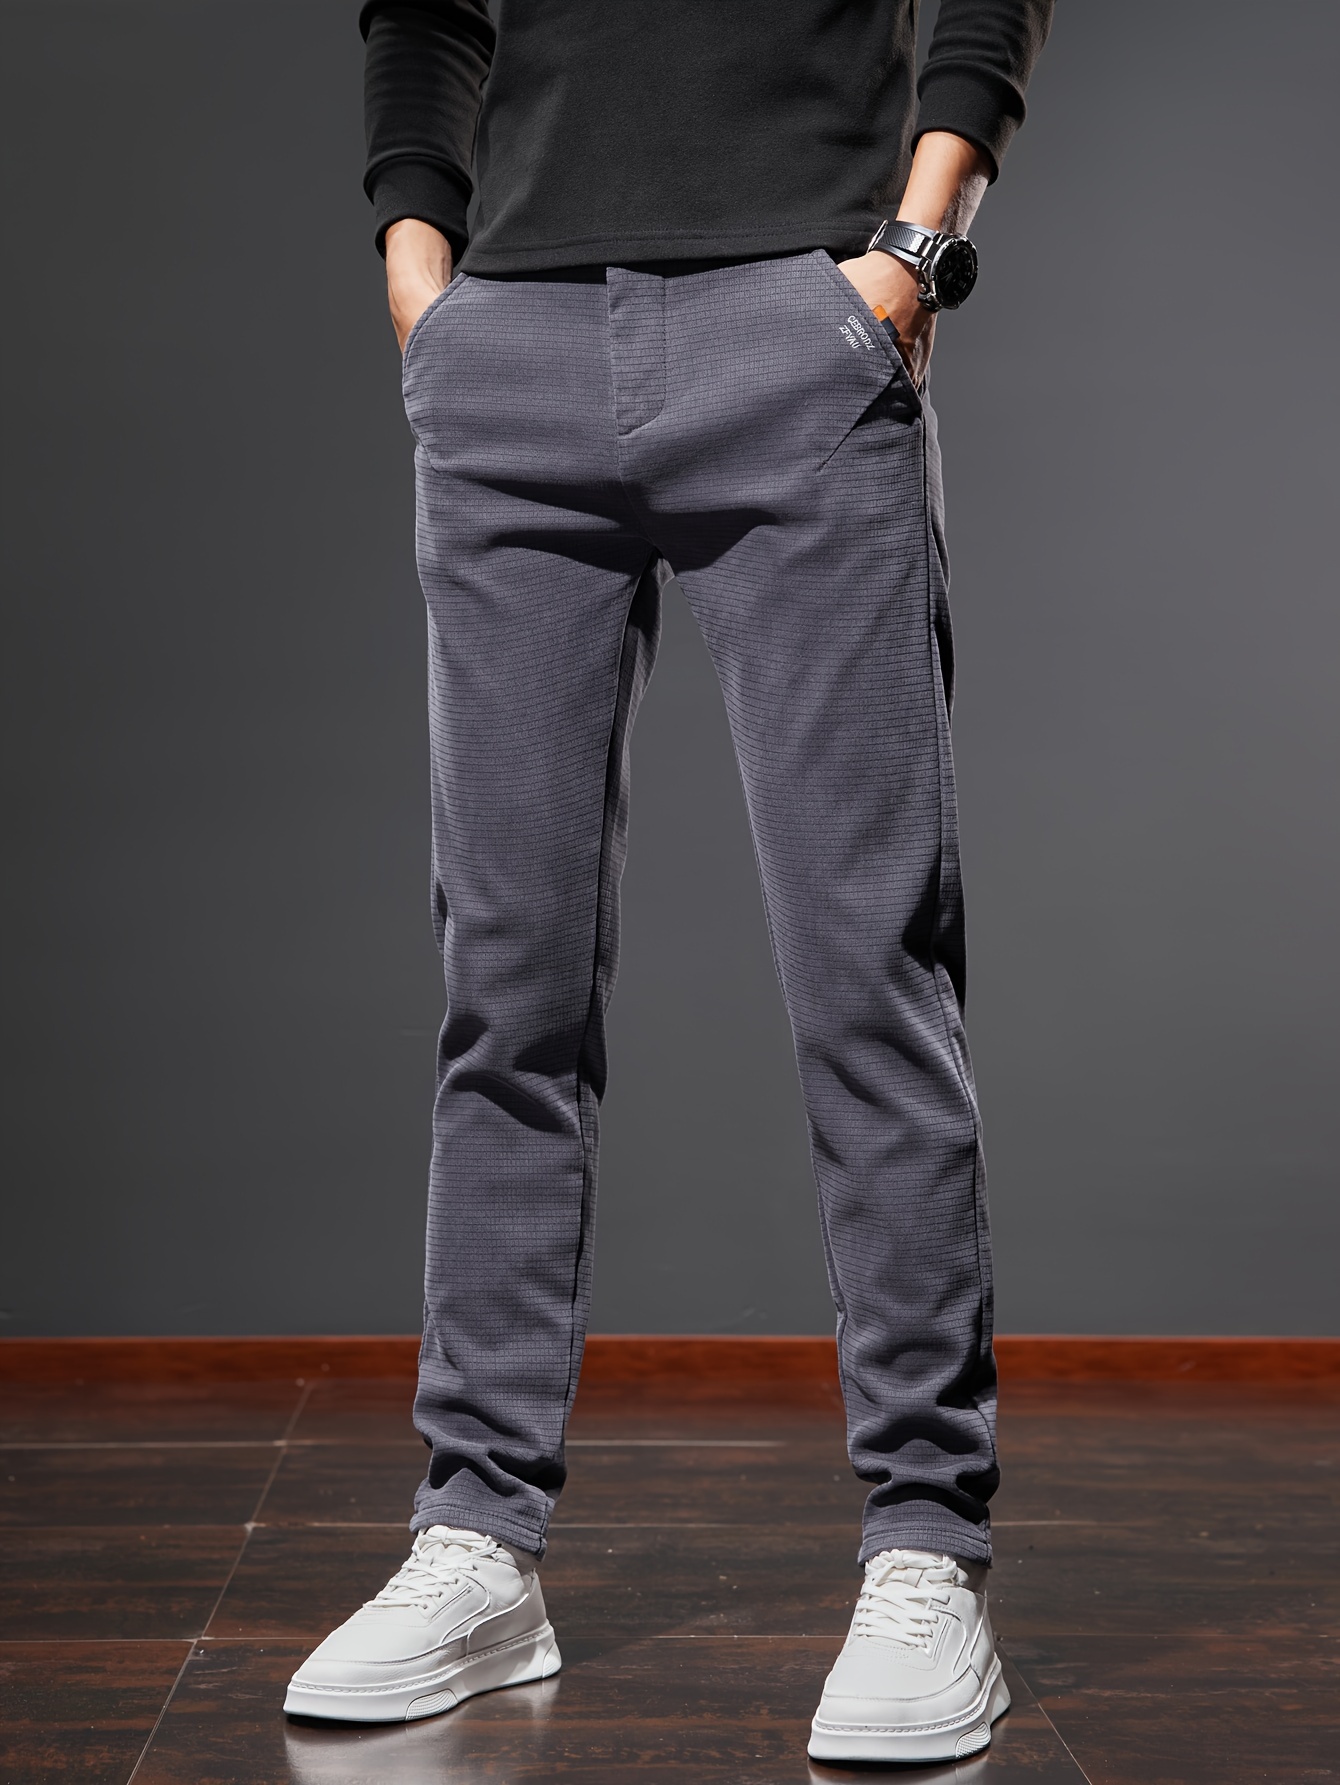 New Mens Business Slim Straight Pants Spring Casual Trousers